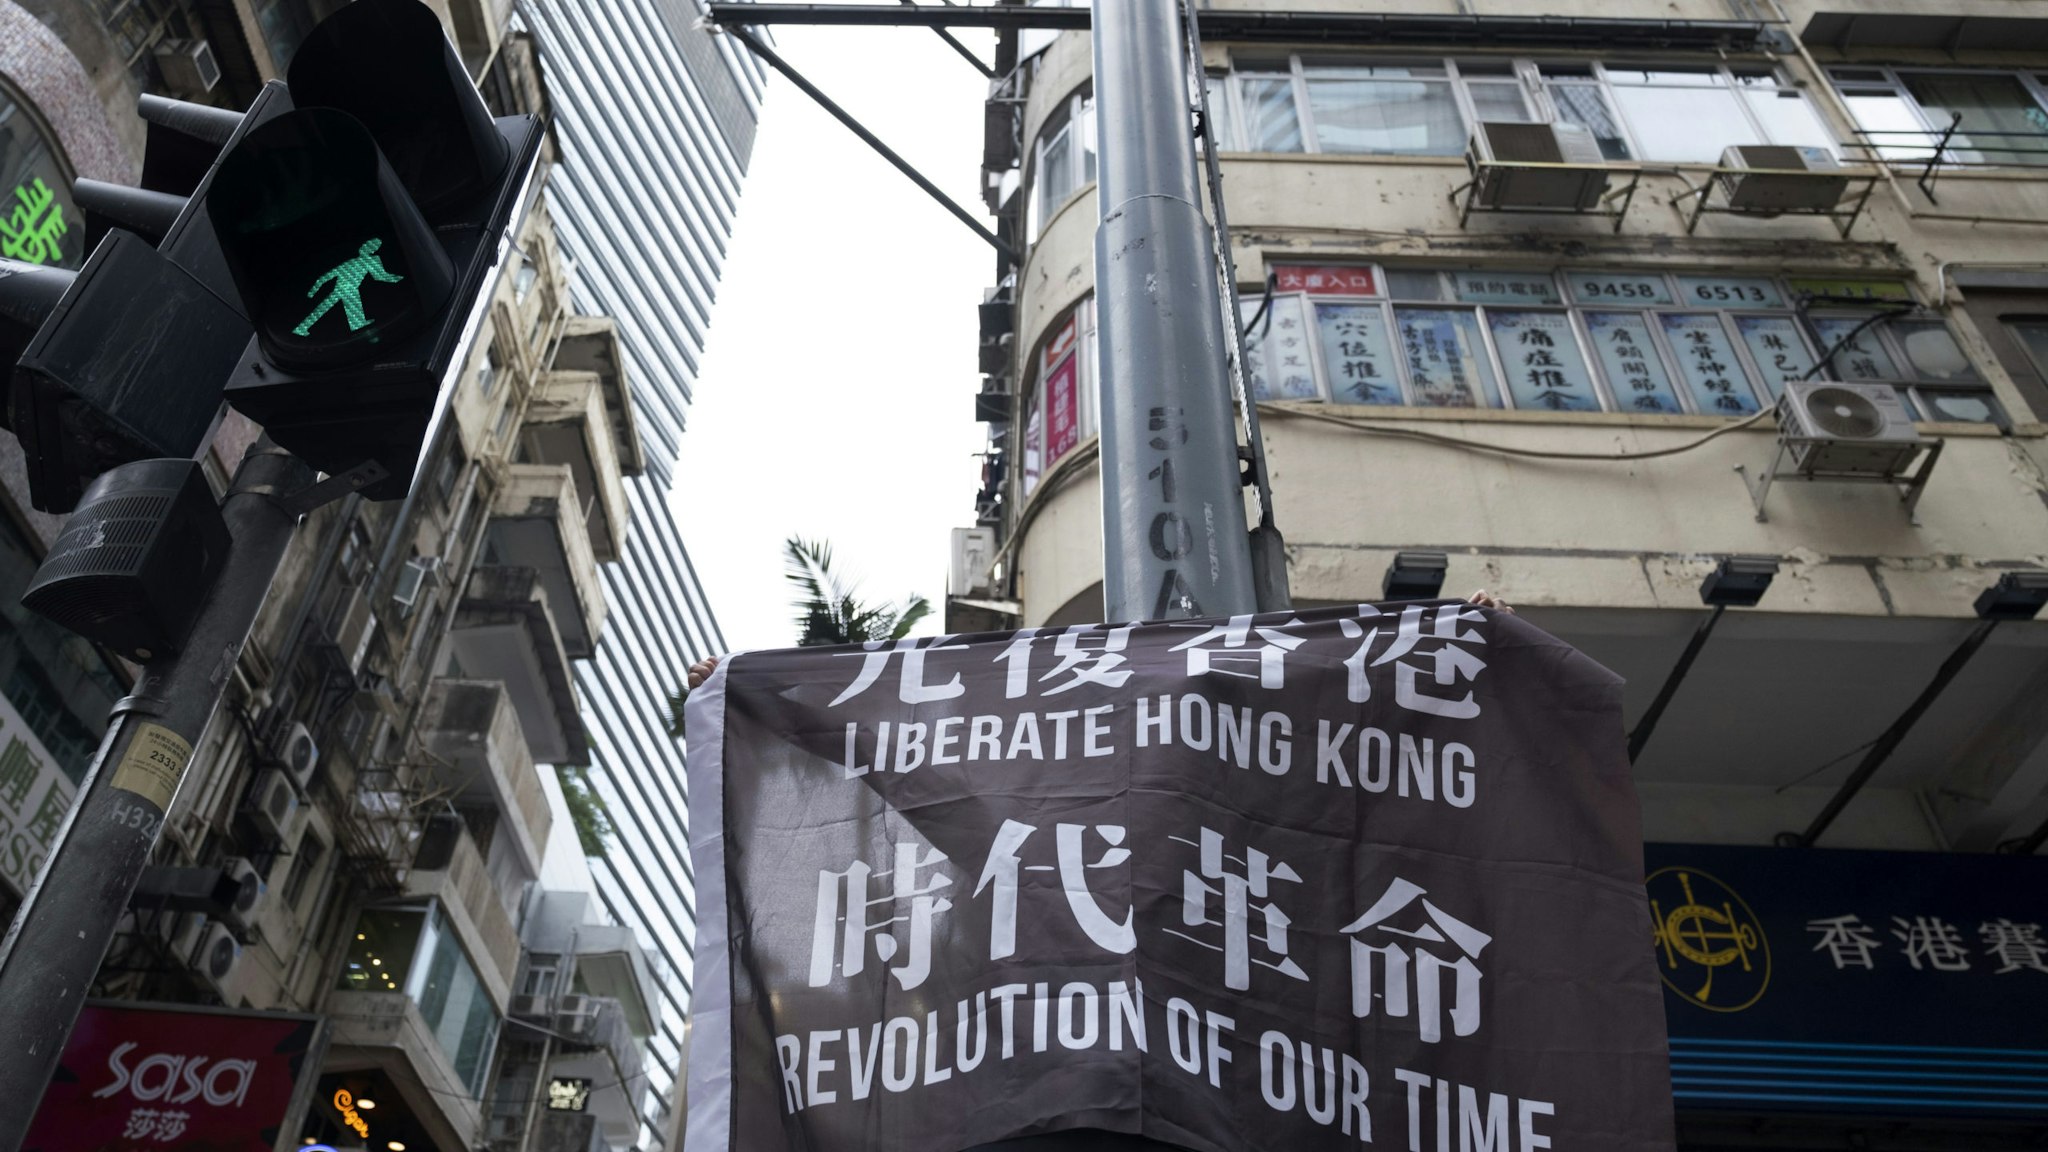 A demonstrator raises a flag reading "Liberate Hong Kong, Revolution of Our Time" during a protest in Hong Kong, China, on Wednesday, May 27, 2020. Officers fired pepper spray projectiles in downtown Hong Kong and arrested at least 16 people as protesters hit the streets Wednesday to oppose China's increasing control over the city, a return to unrest largely unseen since last year. Photographer: Justin Chin/Bloomberg via Getty Images